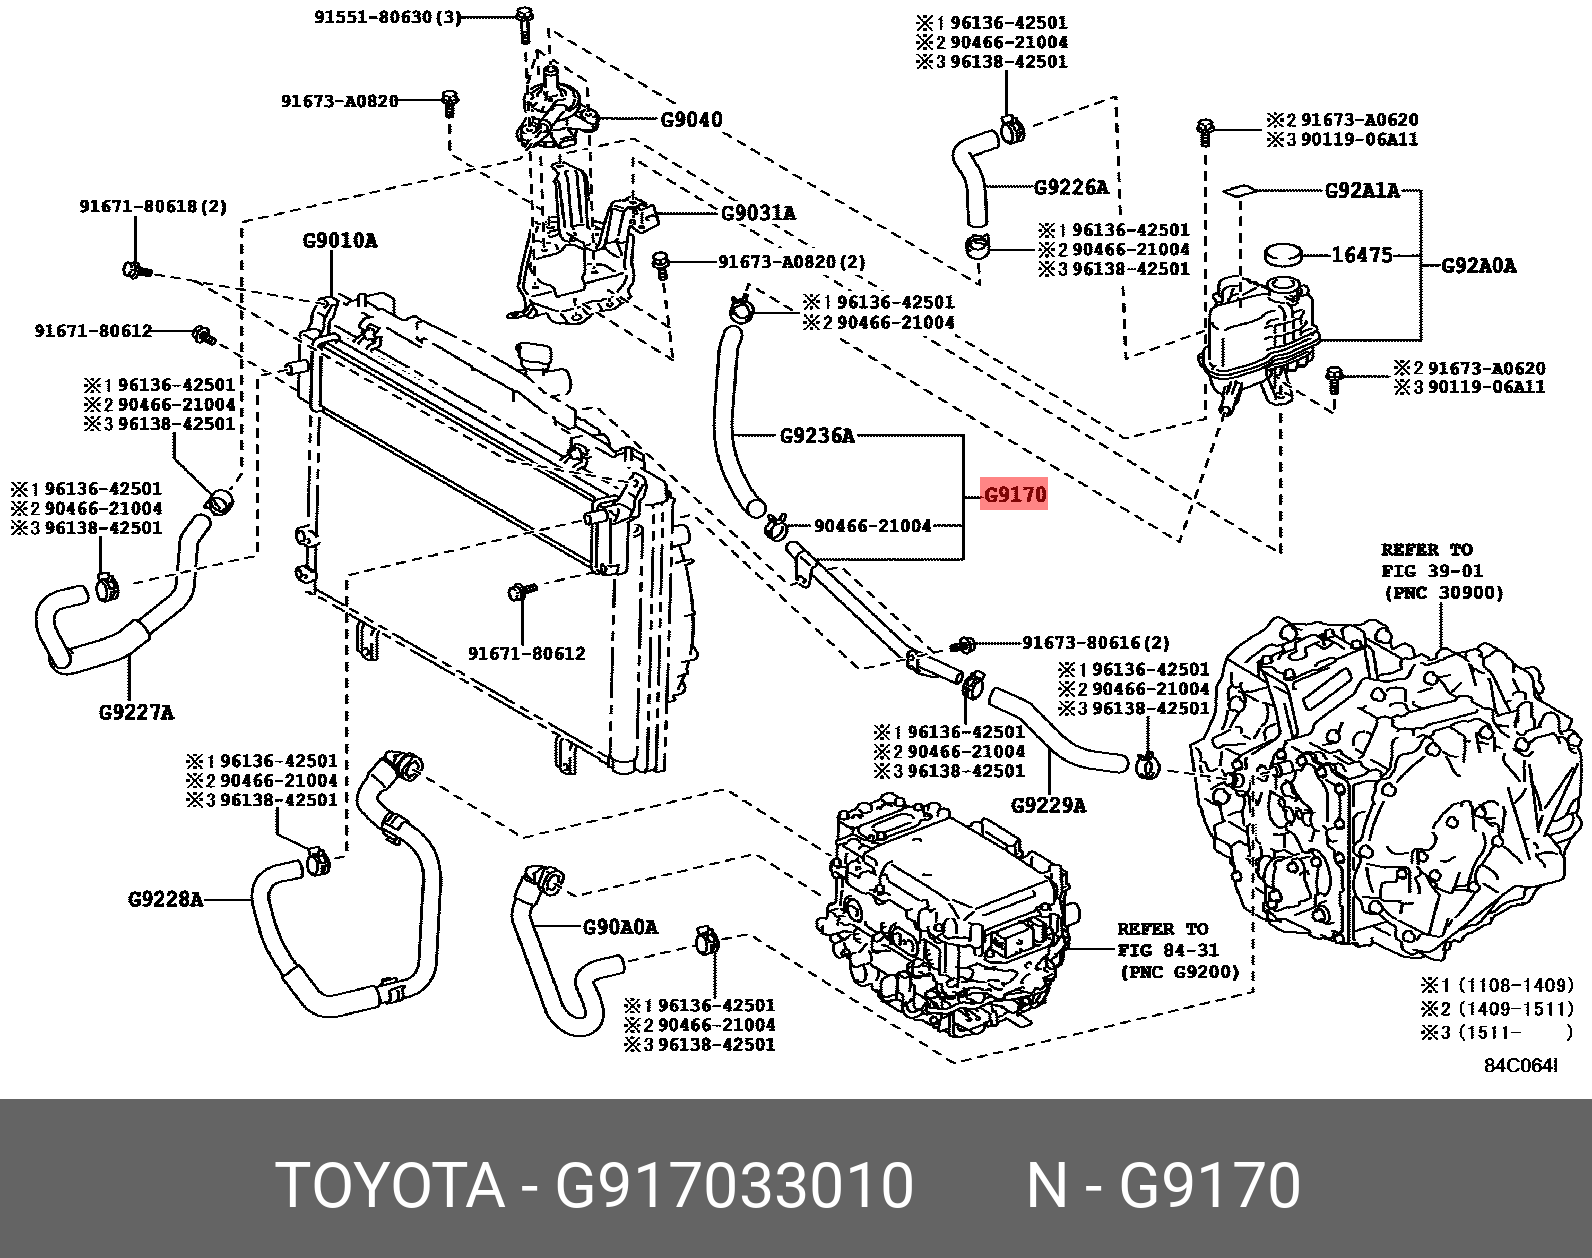 CAMRY HYBRID 201108 - 201704, PIPE ASSY, INVERTER COOLING NO.1